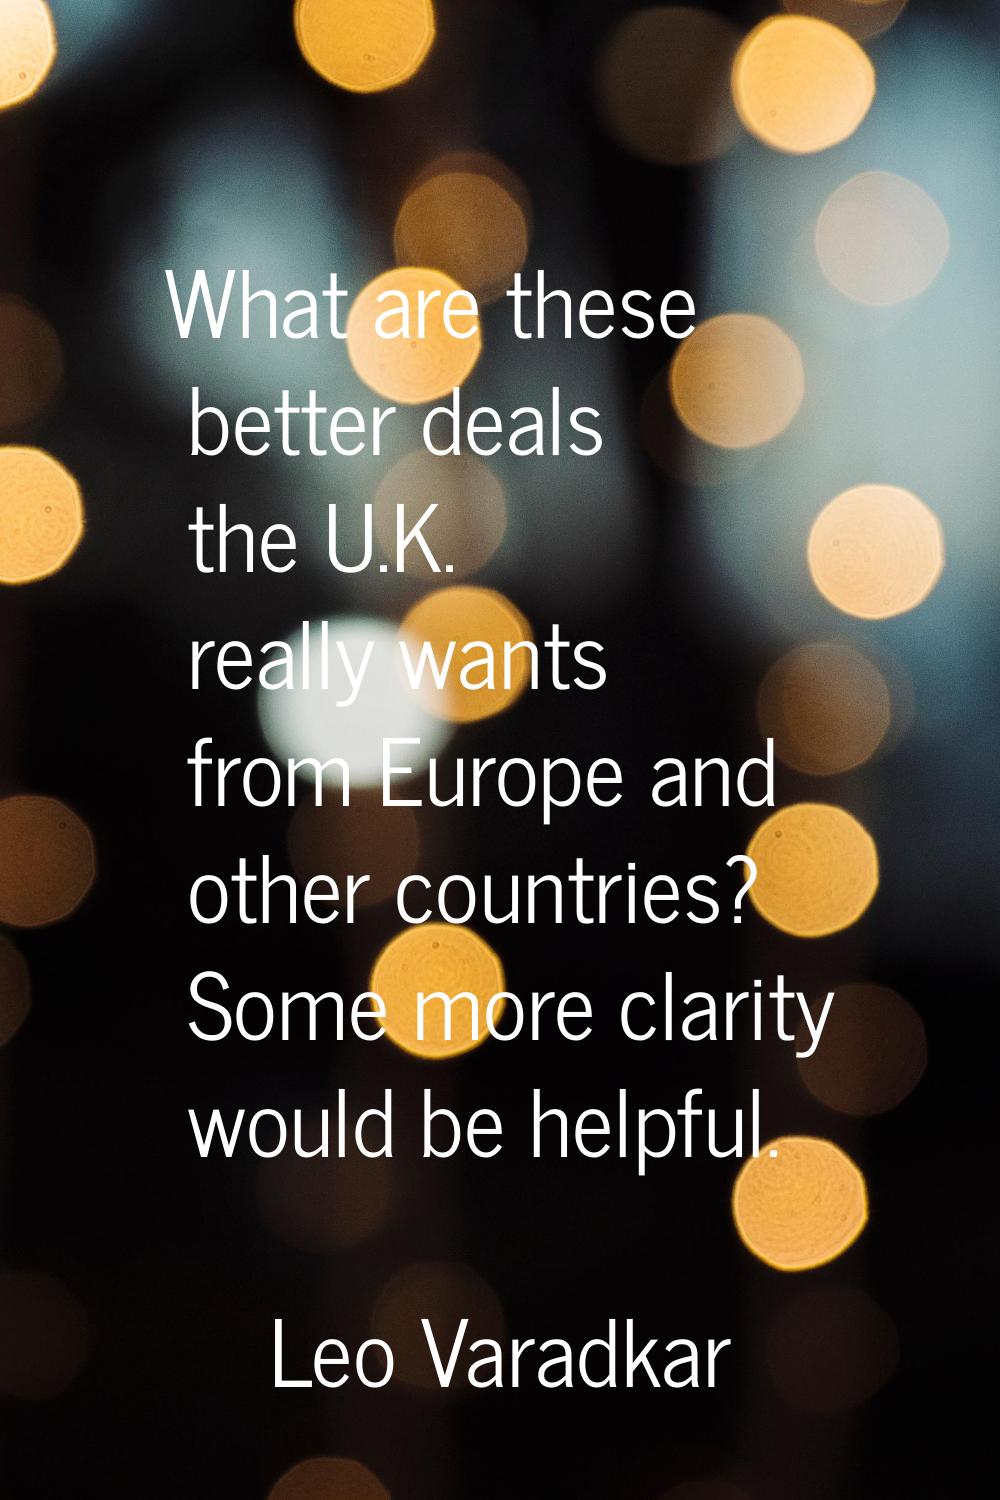 What are these better deals the U.K. really wants from Europe and other countries? Some more clarit